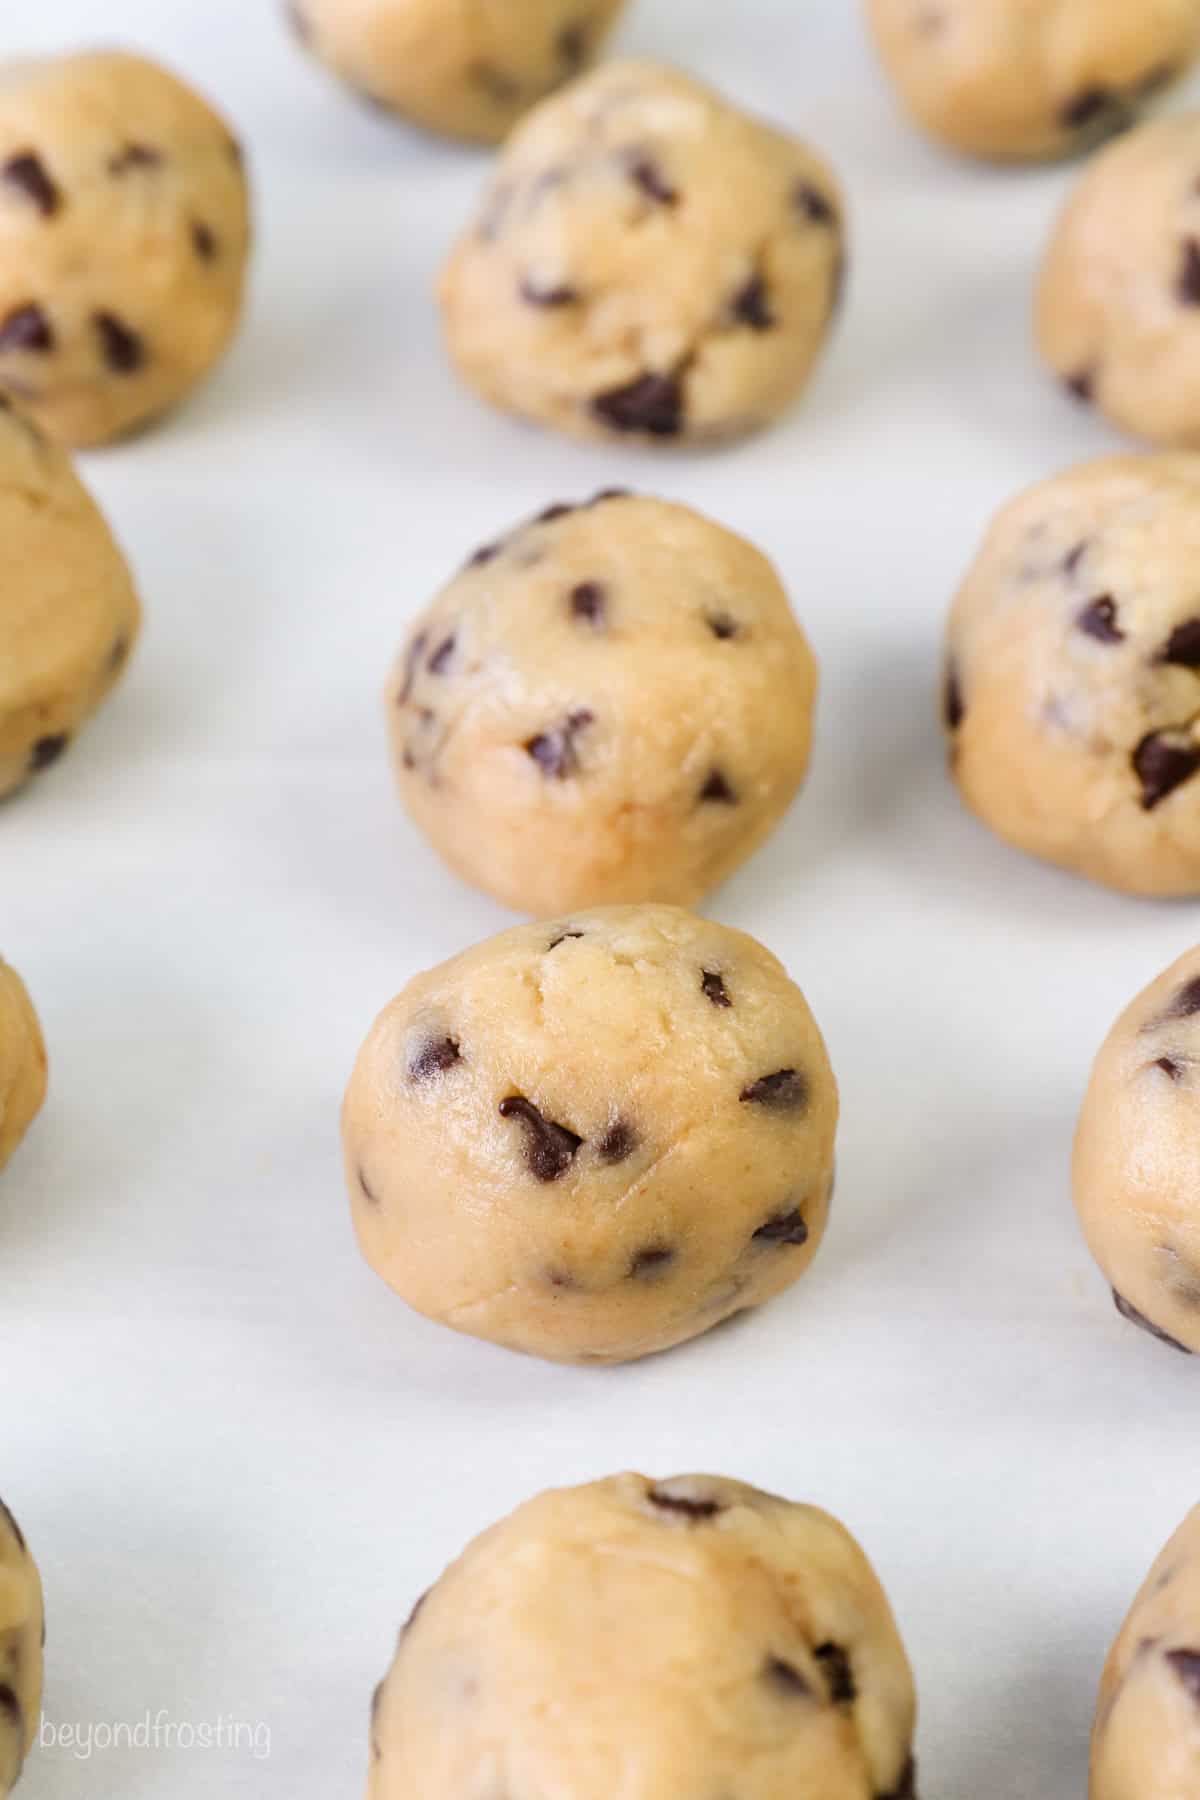 Rows of chocolate chip cookie dough balls.